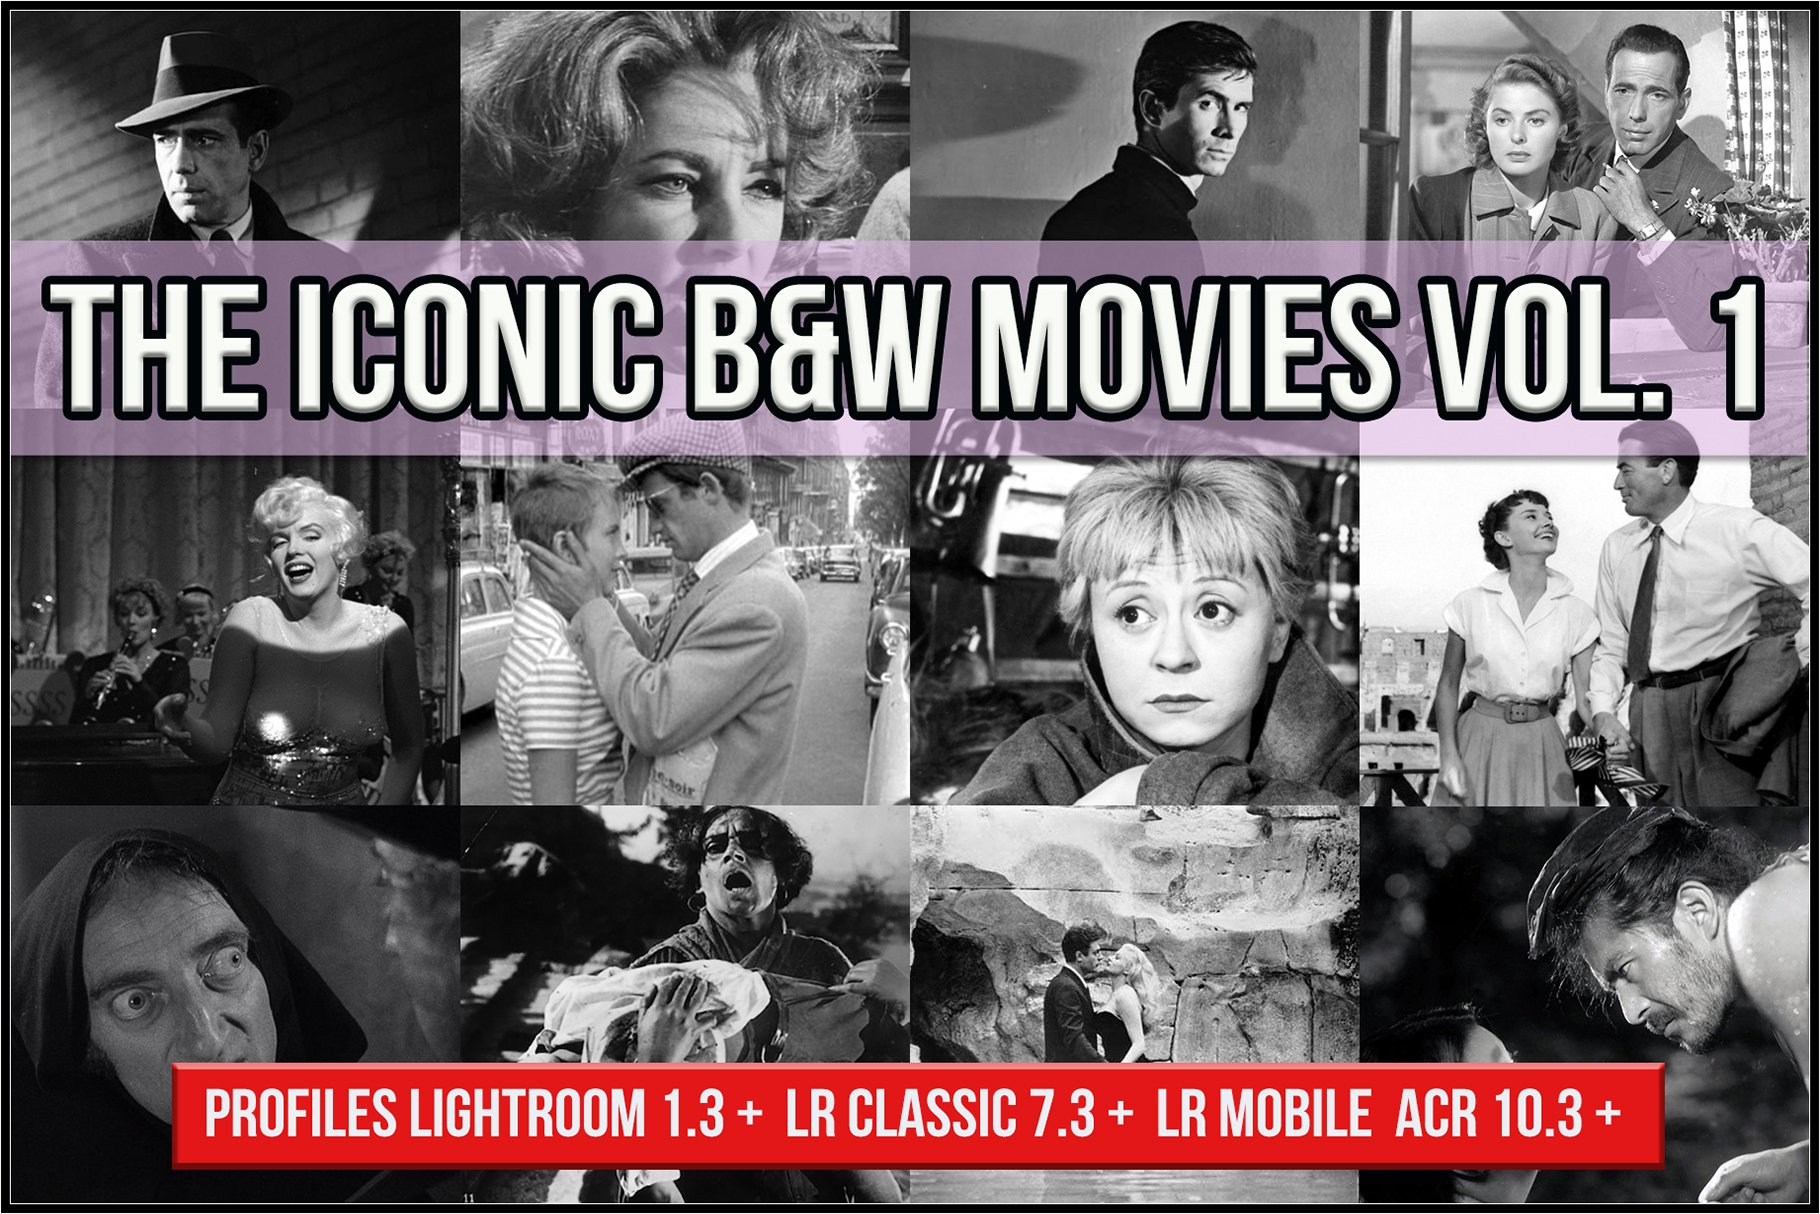 The Iconic B&W Movies V. 1 profilescover image.